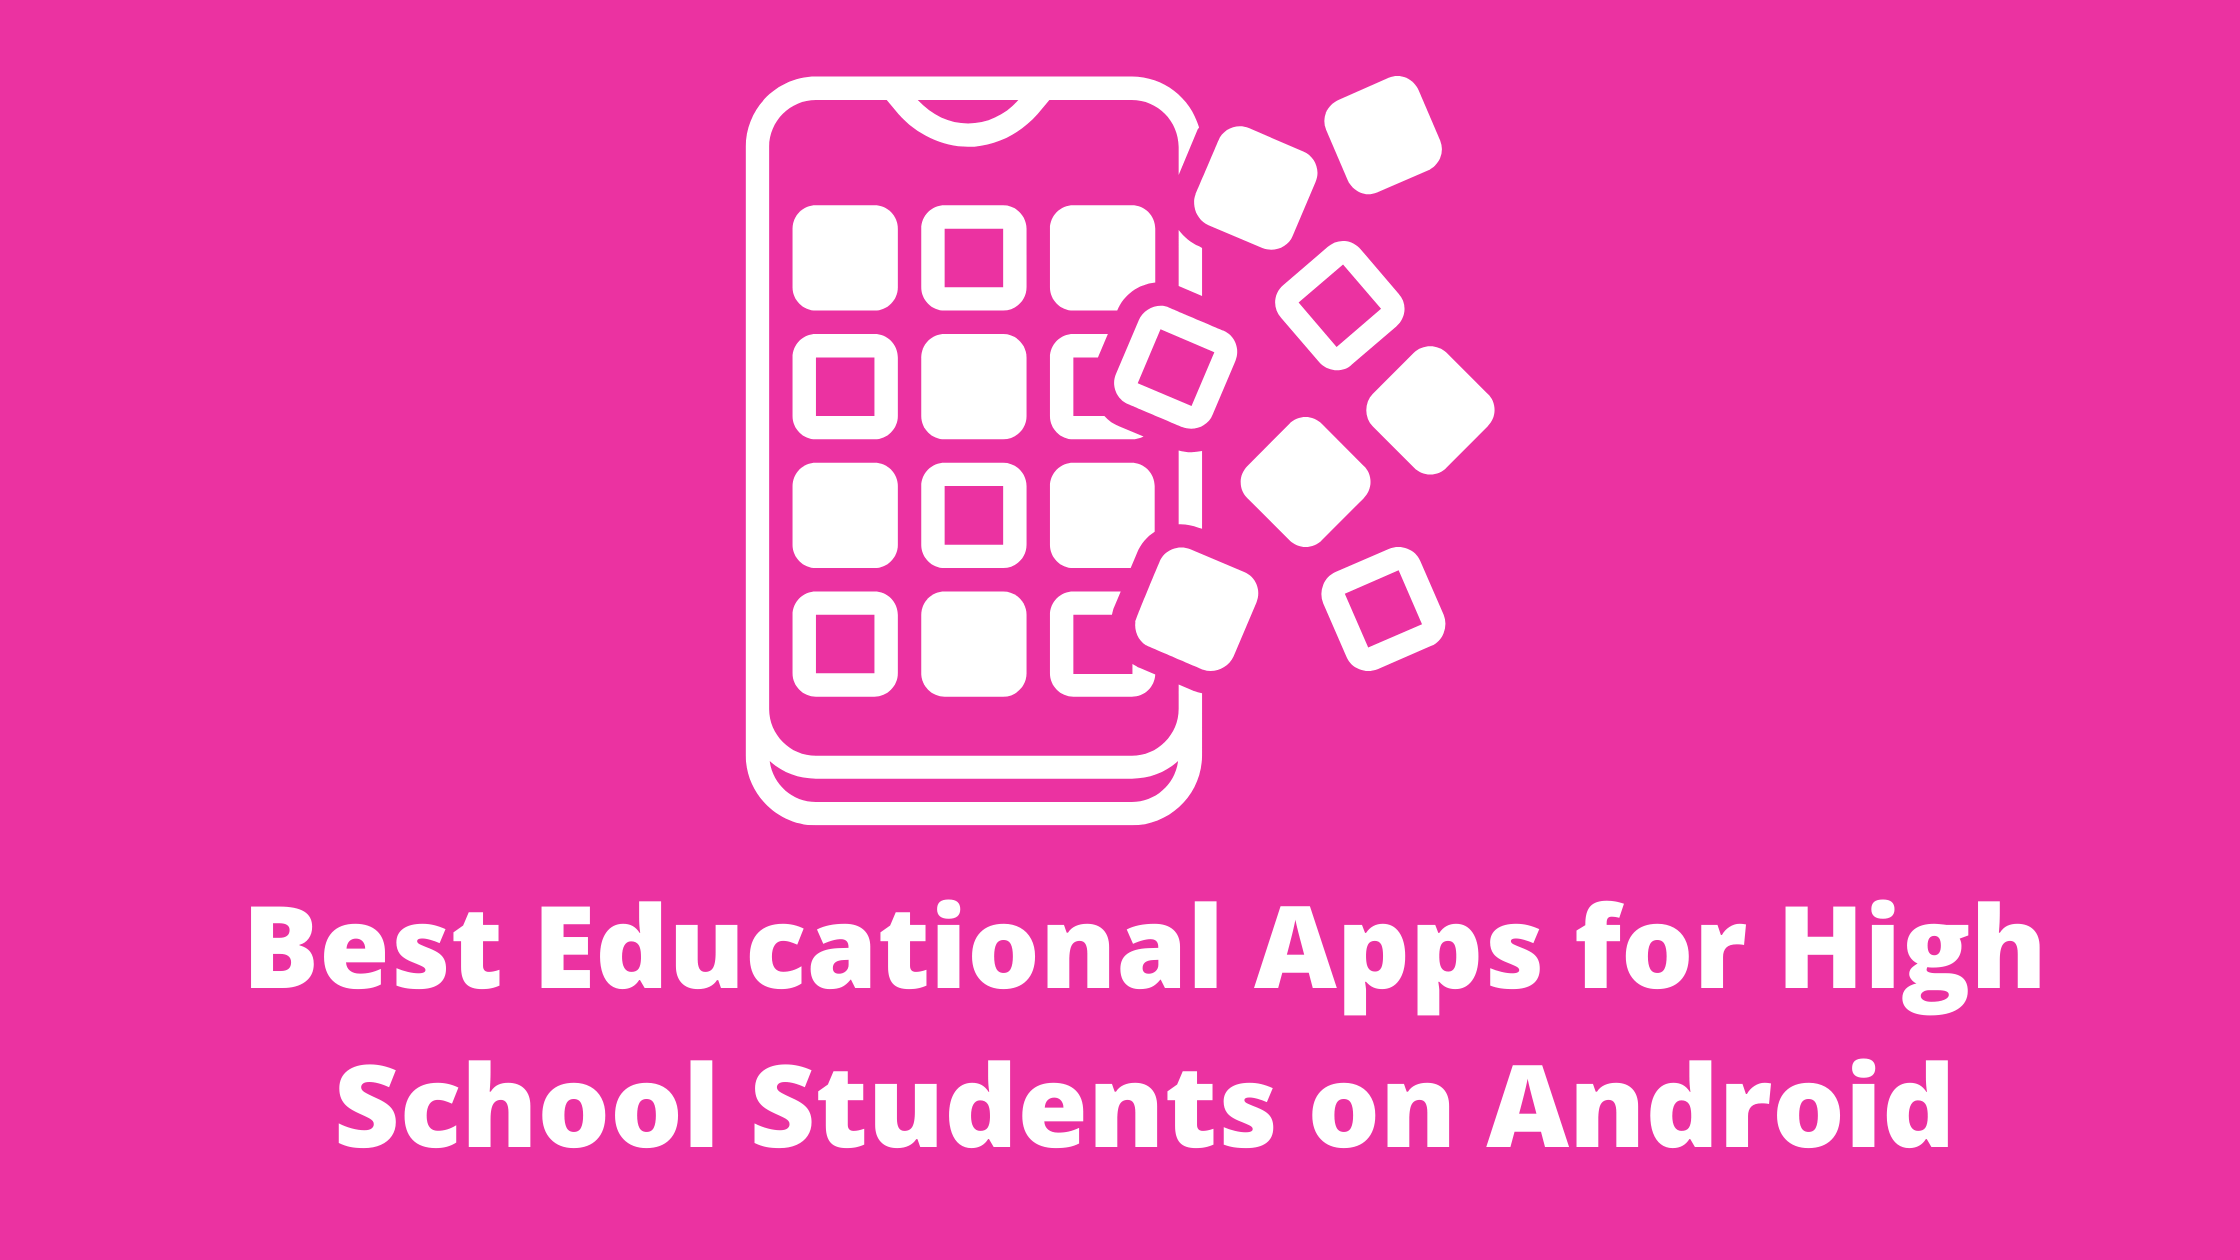 Best Educational Apps for High School Students on Android